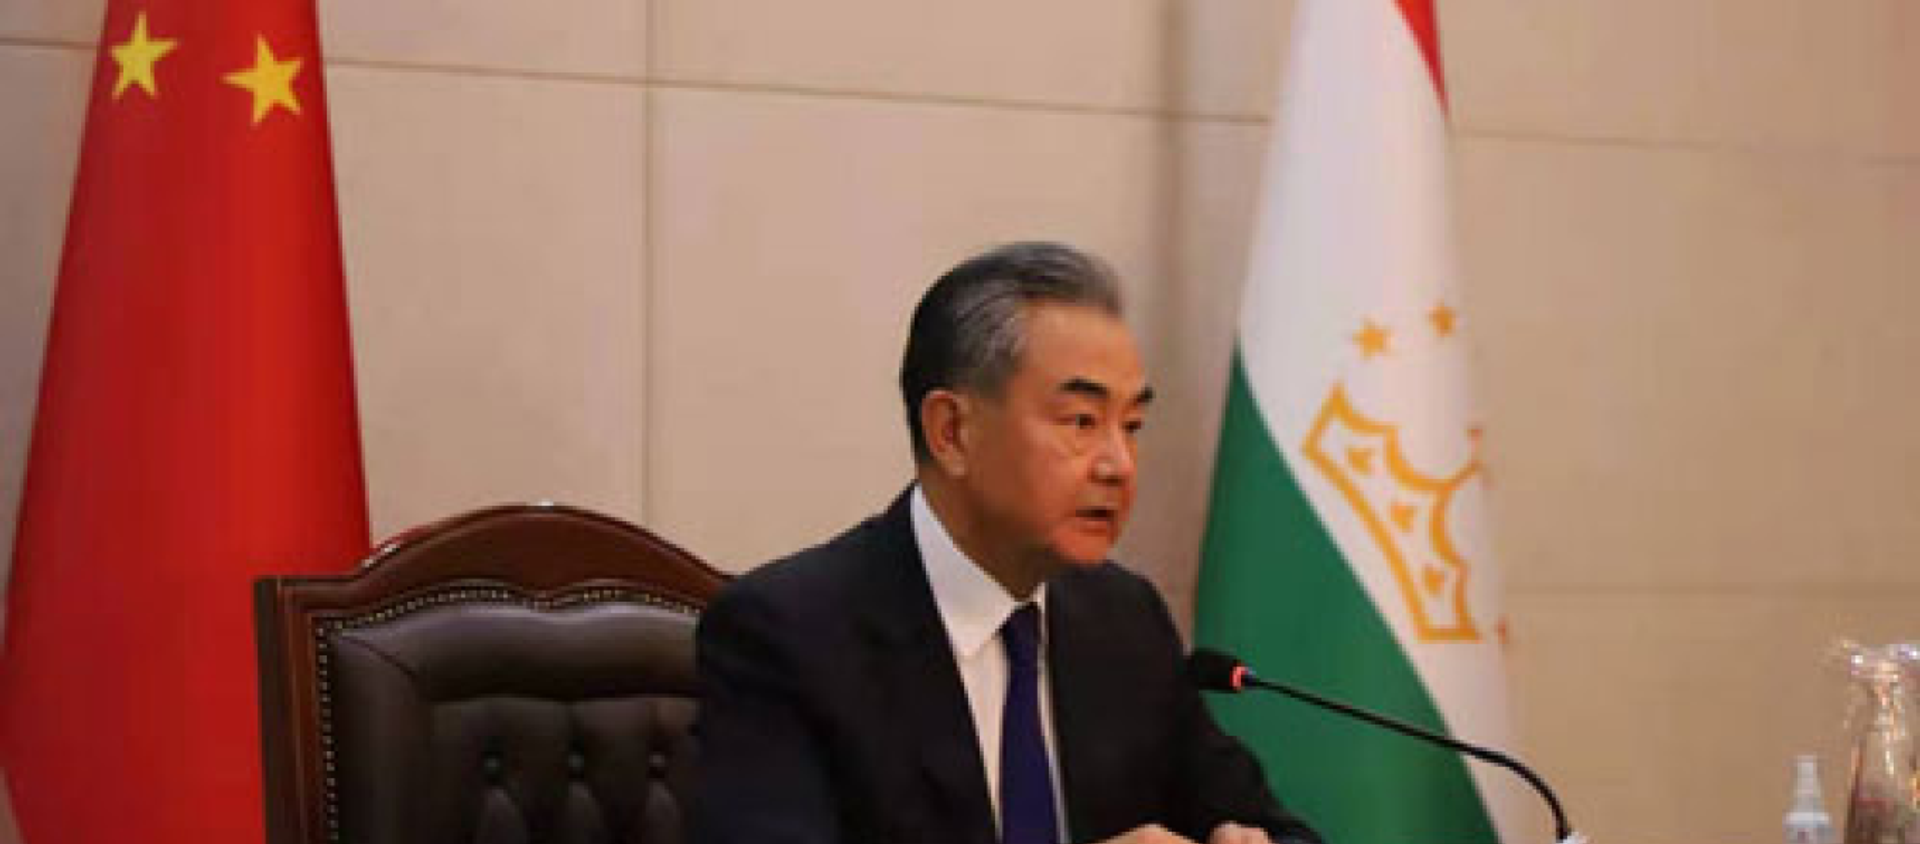 Chinese State Councilor and Foreign Minister Wang Yi met with the press in Dushanbe with Tajik Foreign Minister Sirojiddin Muhriddin - Sputnik International, 1920, 14.07.2021